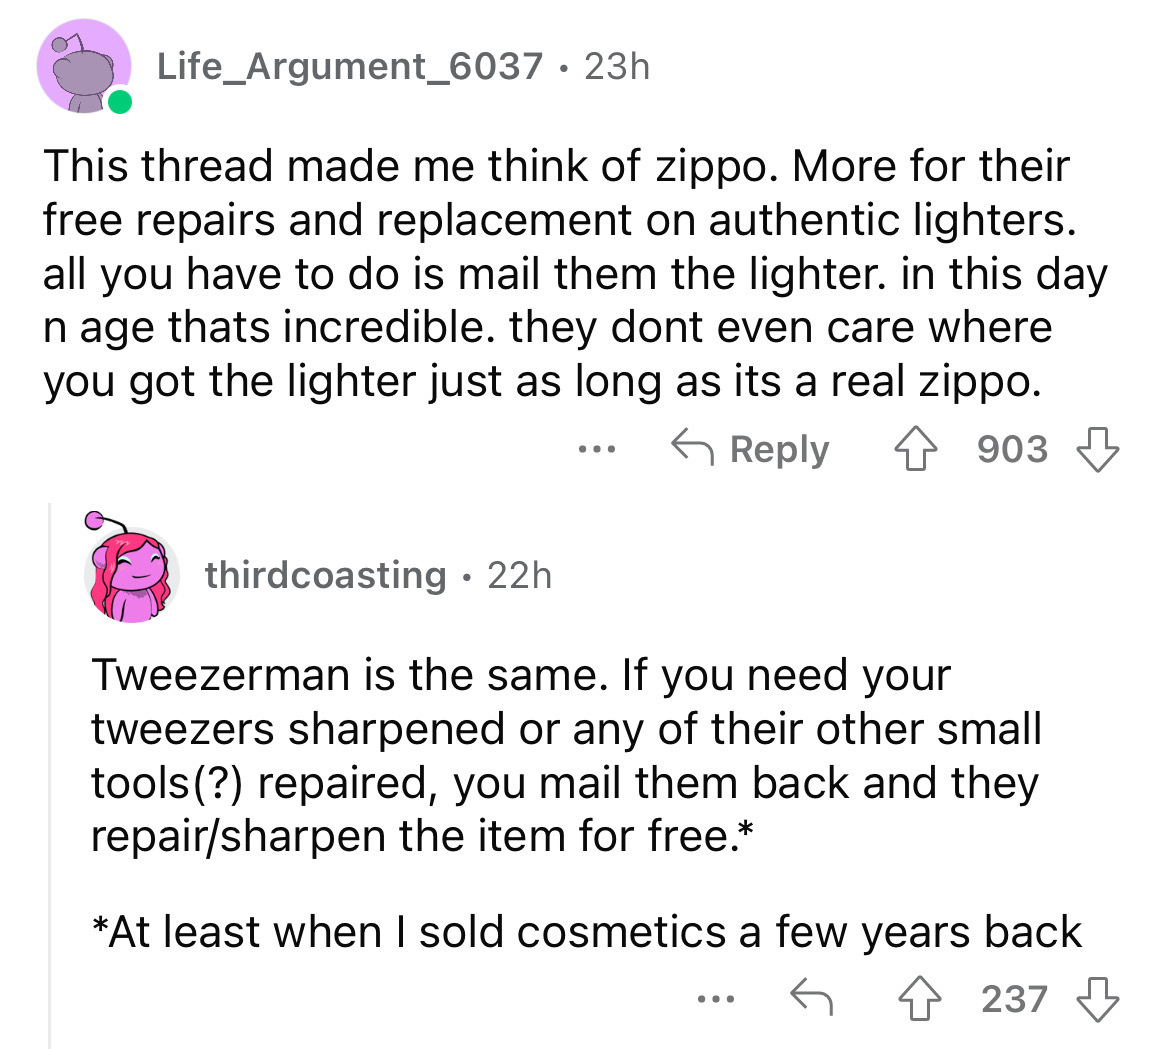 angle - Life_Argument_6037 23h This thread made me think of zippo. More for their free repairs and replacement on authentic lighters. all you have to do is mail them the lighter. in this day n age thats incredible. they dont even care where you got the li